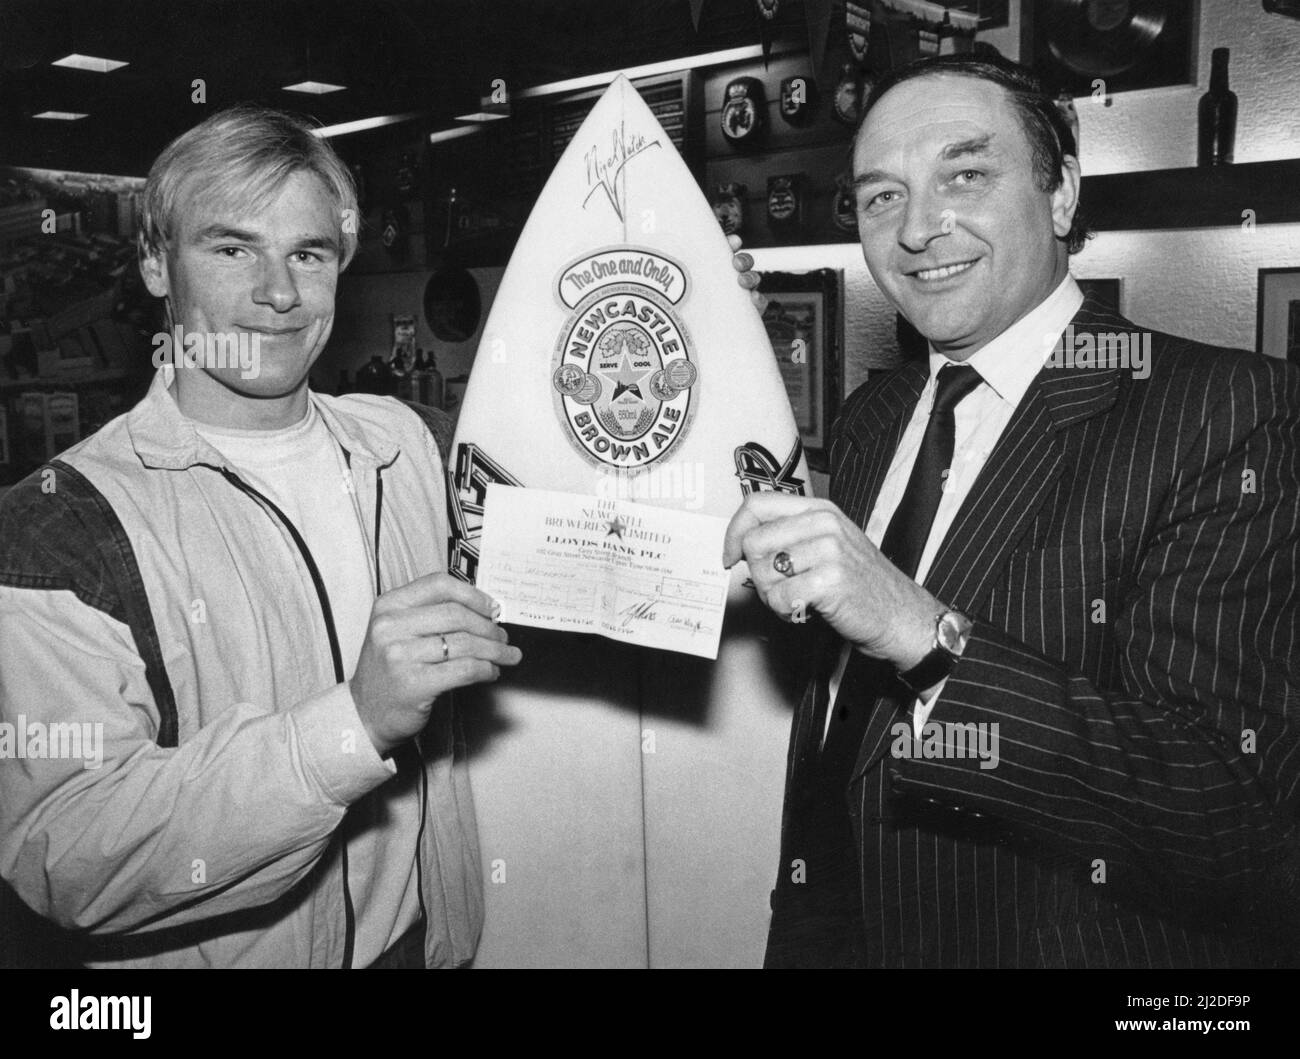 Nigel Veitch, Professional Surfer, will be making waves on the world surf circuit, thanks to sponsors Scottish and Newcastle Breweries. Nigel, 21, was presented with a cheque for 3000 pounds by Scottish and Newcastle sales director Reg Corbidge to cover his travel expenses to world contests in Los Angeles, Japan and South Africa. Pictured January 1986. Stock Photo